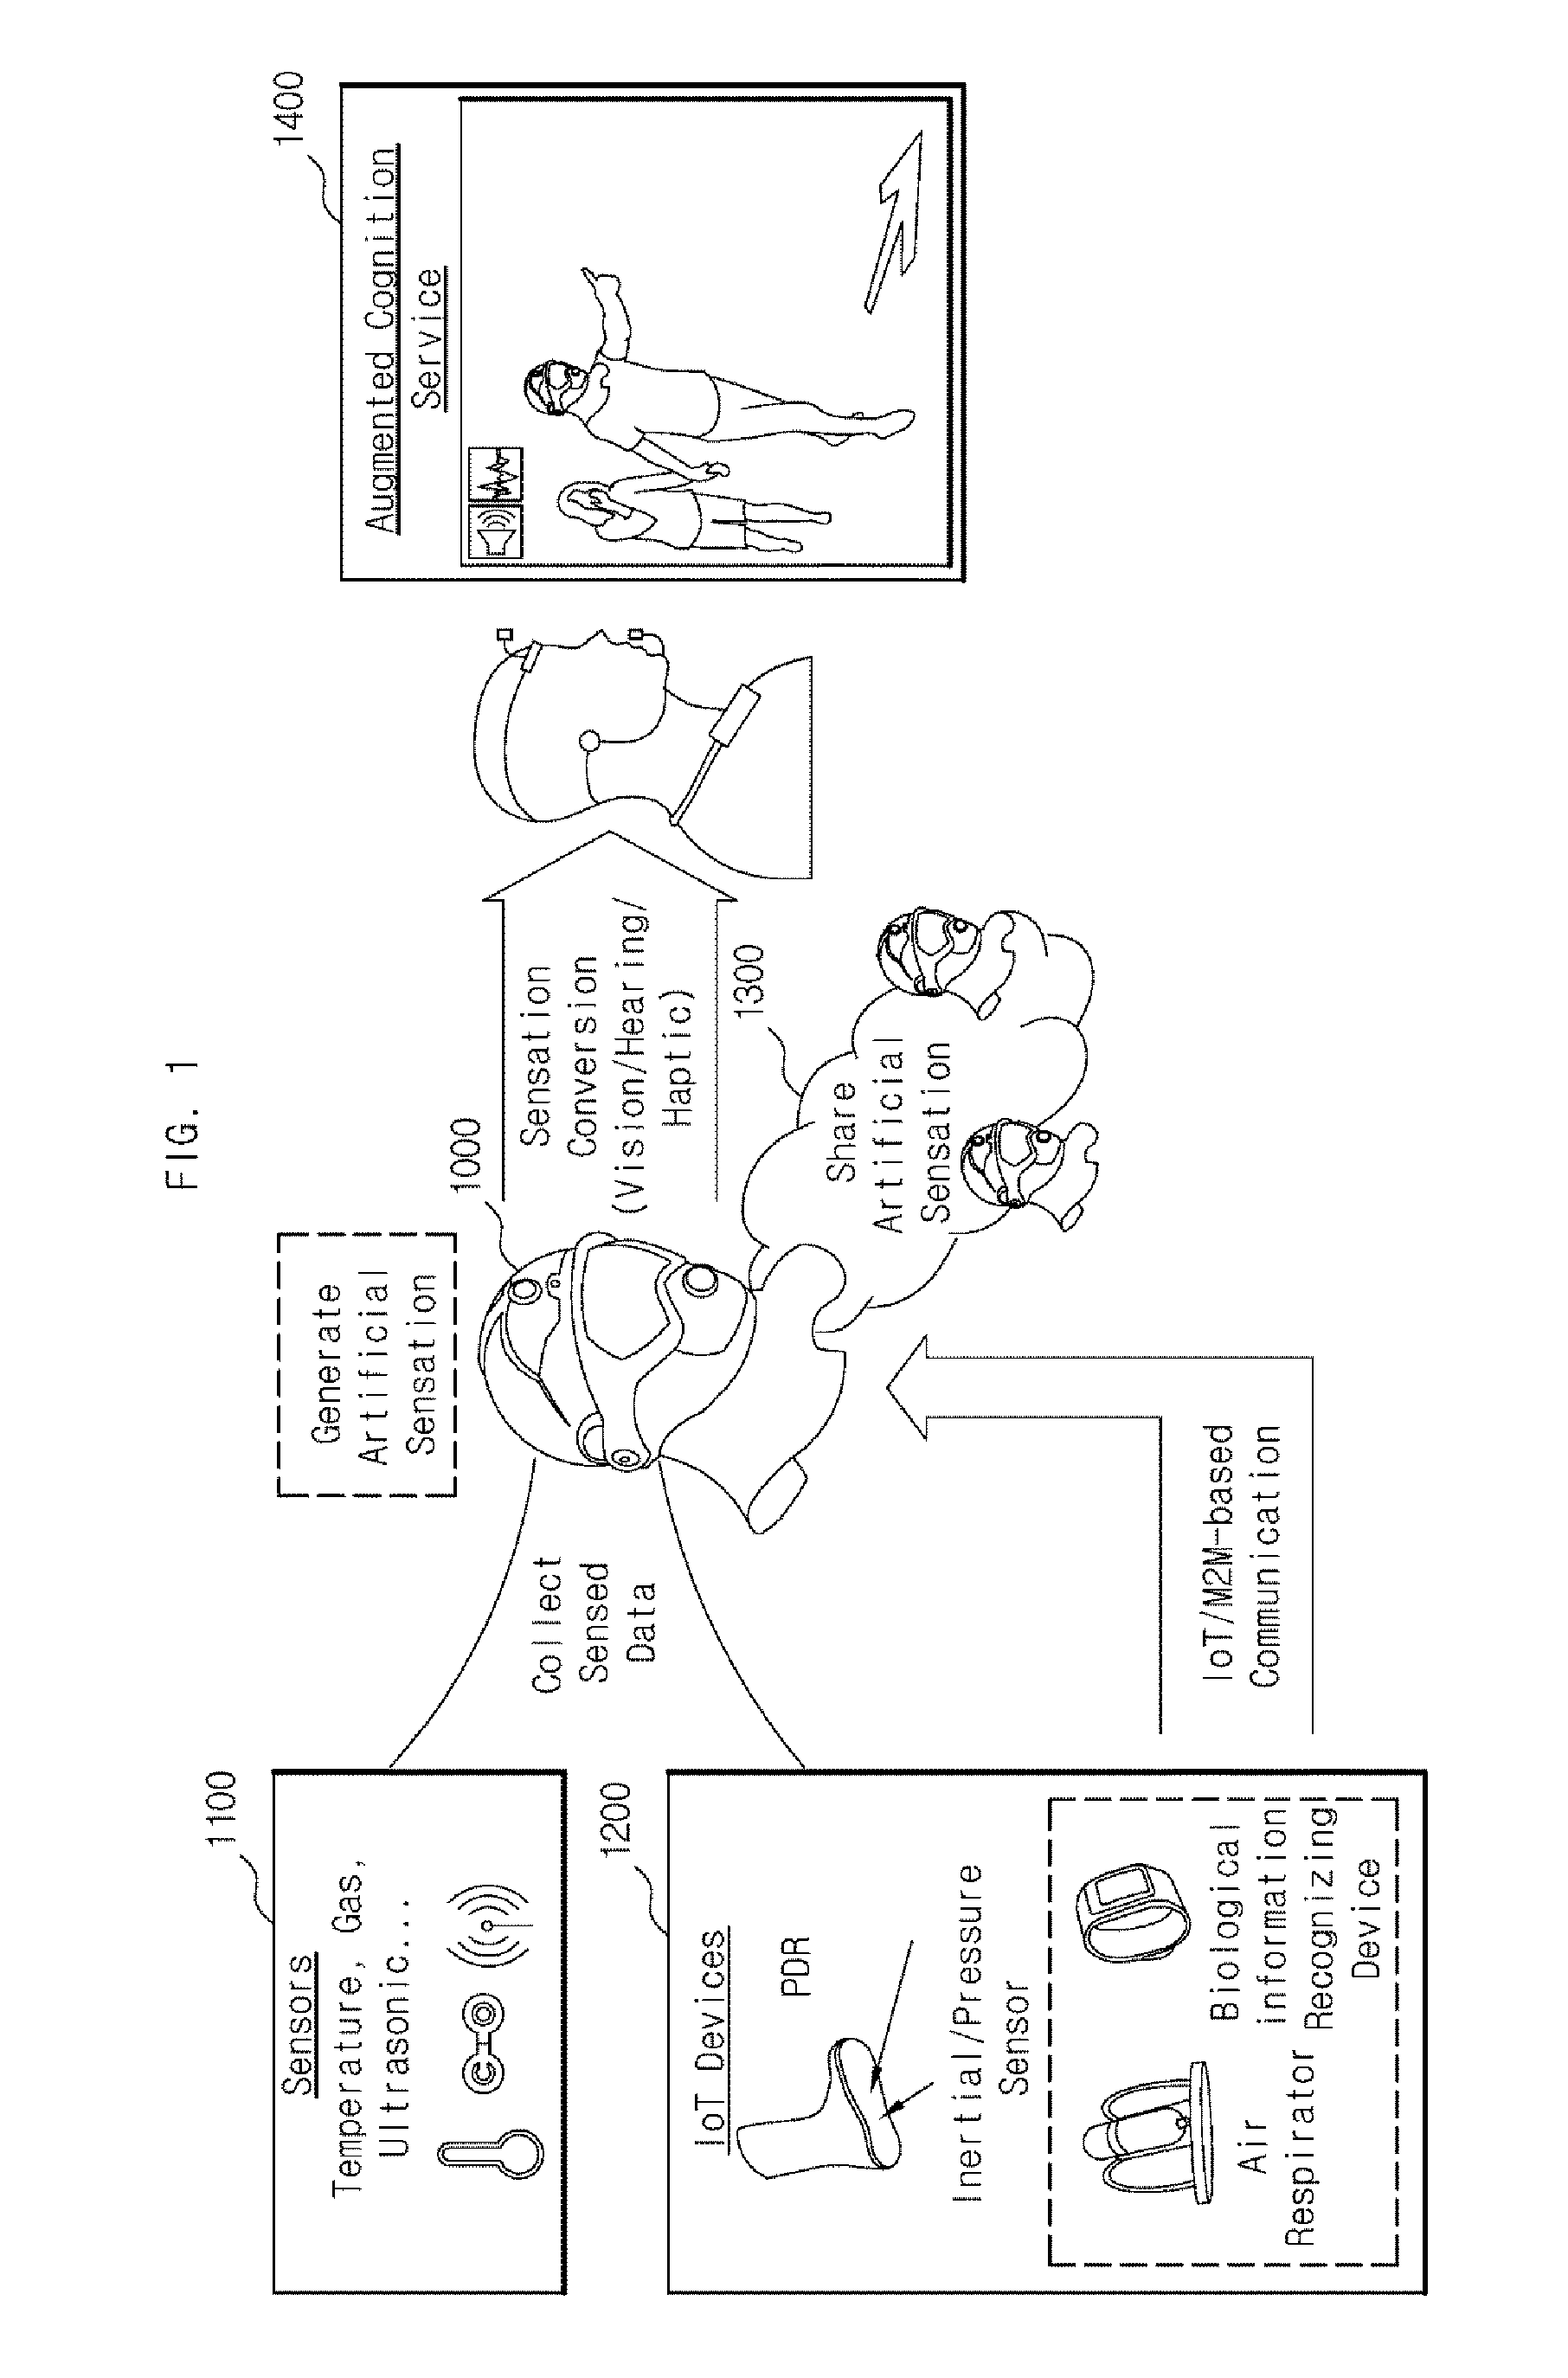 Apparatus and method for augmented cognition